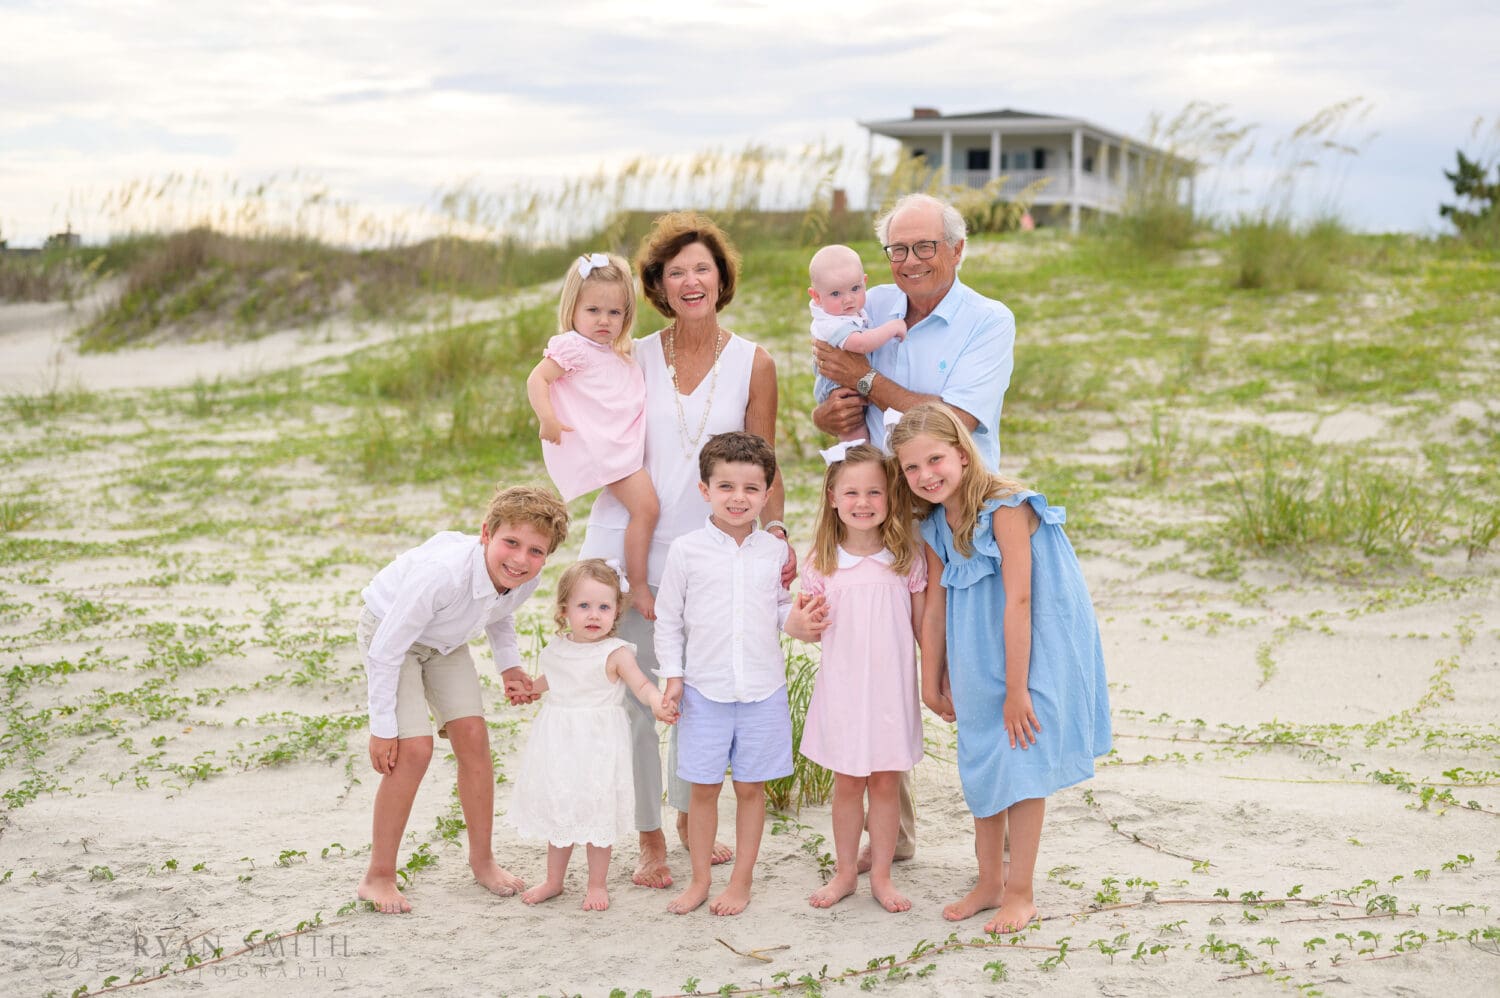 Big family with lots of kids on a windy day - Pawleys Island